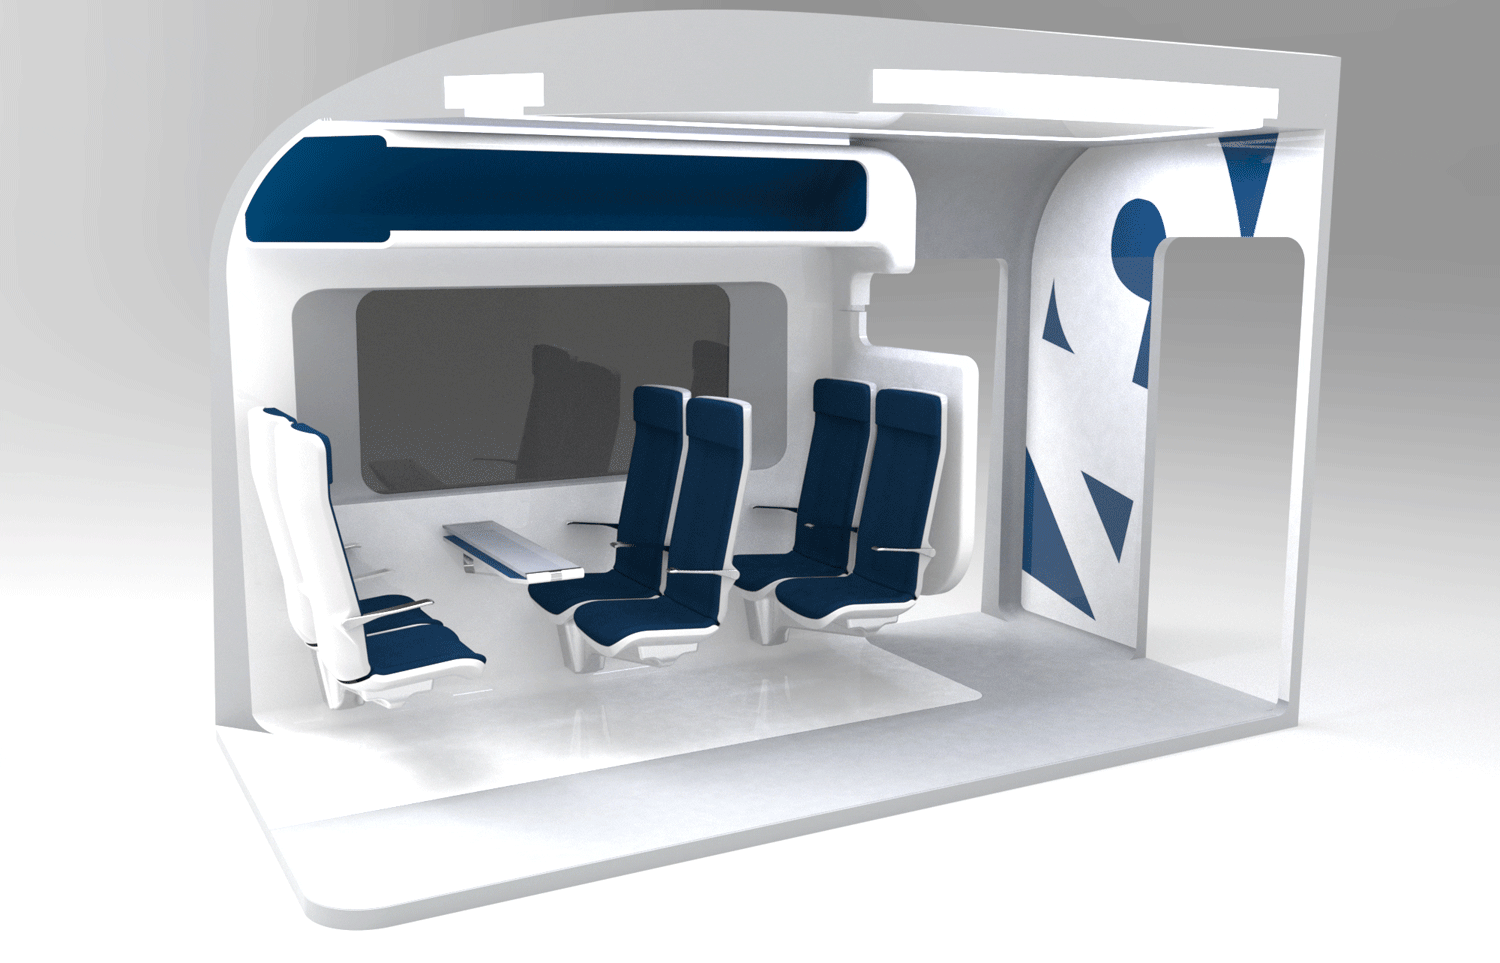 42 Technology’s adaptable carriage concept features in Eureka magazine